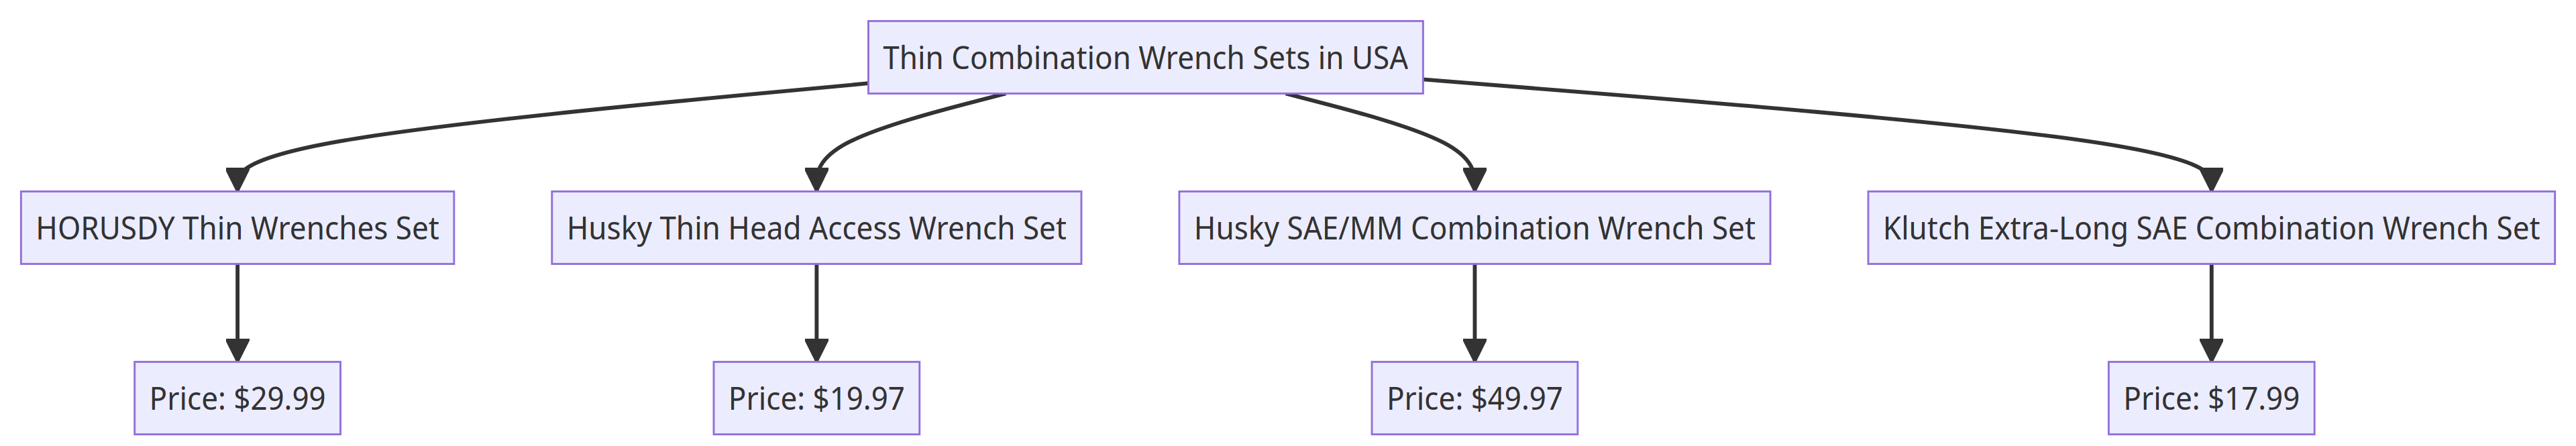 Flow Chart of Wrench Sets